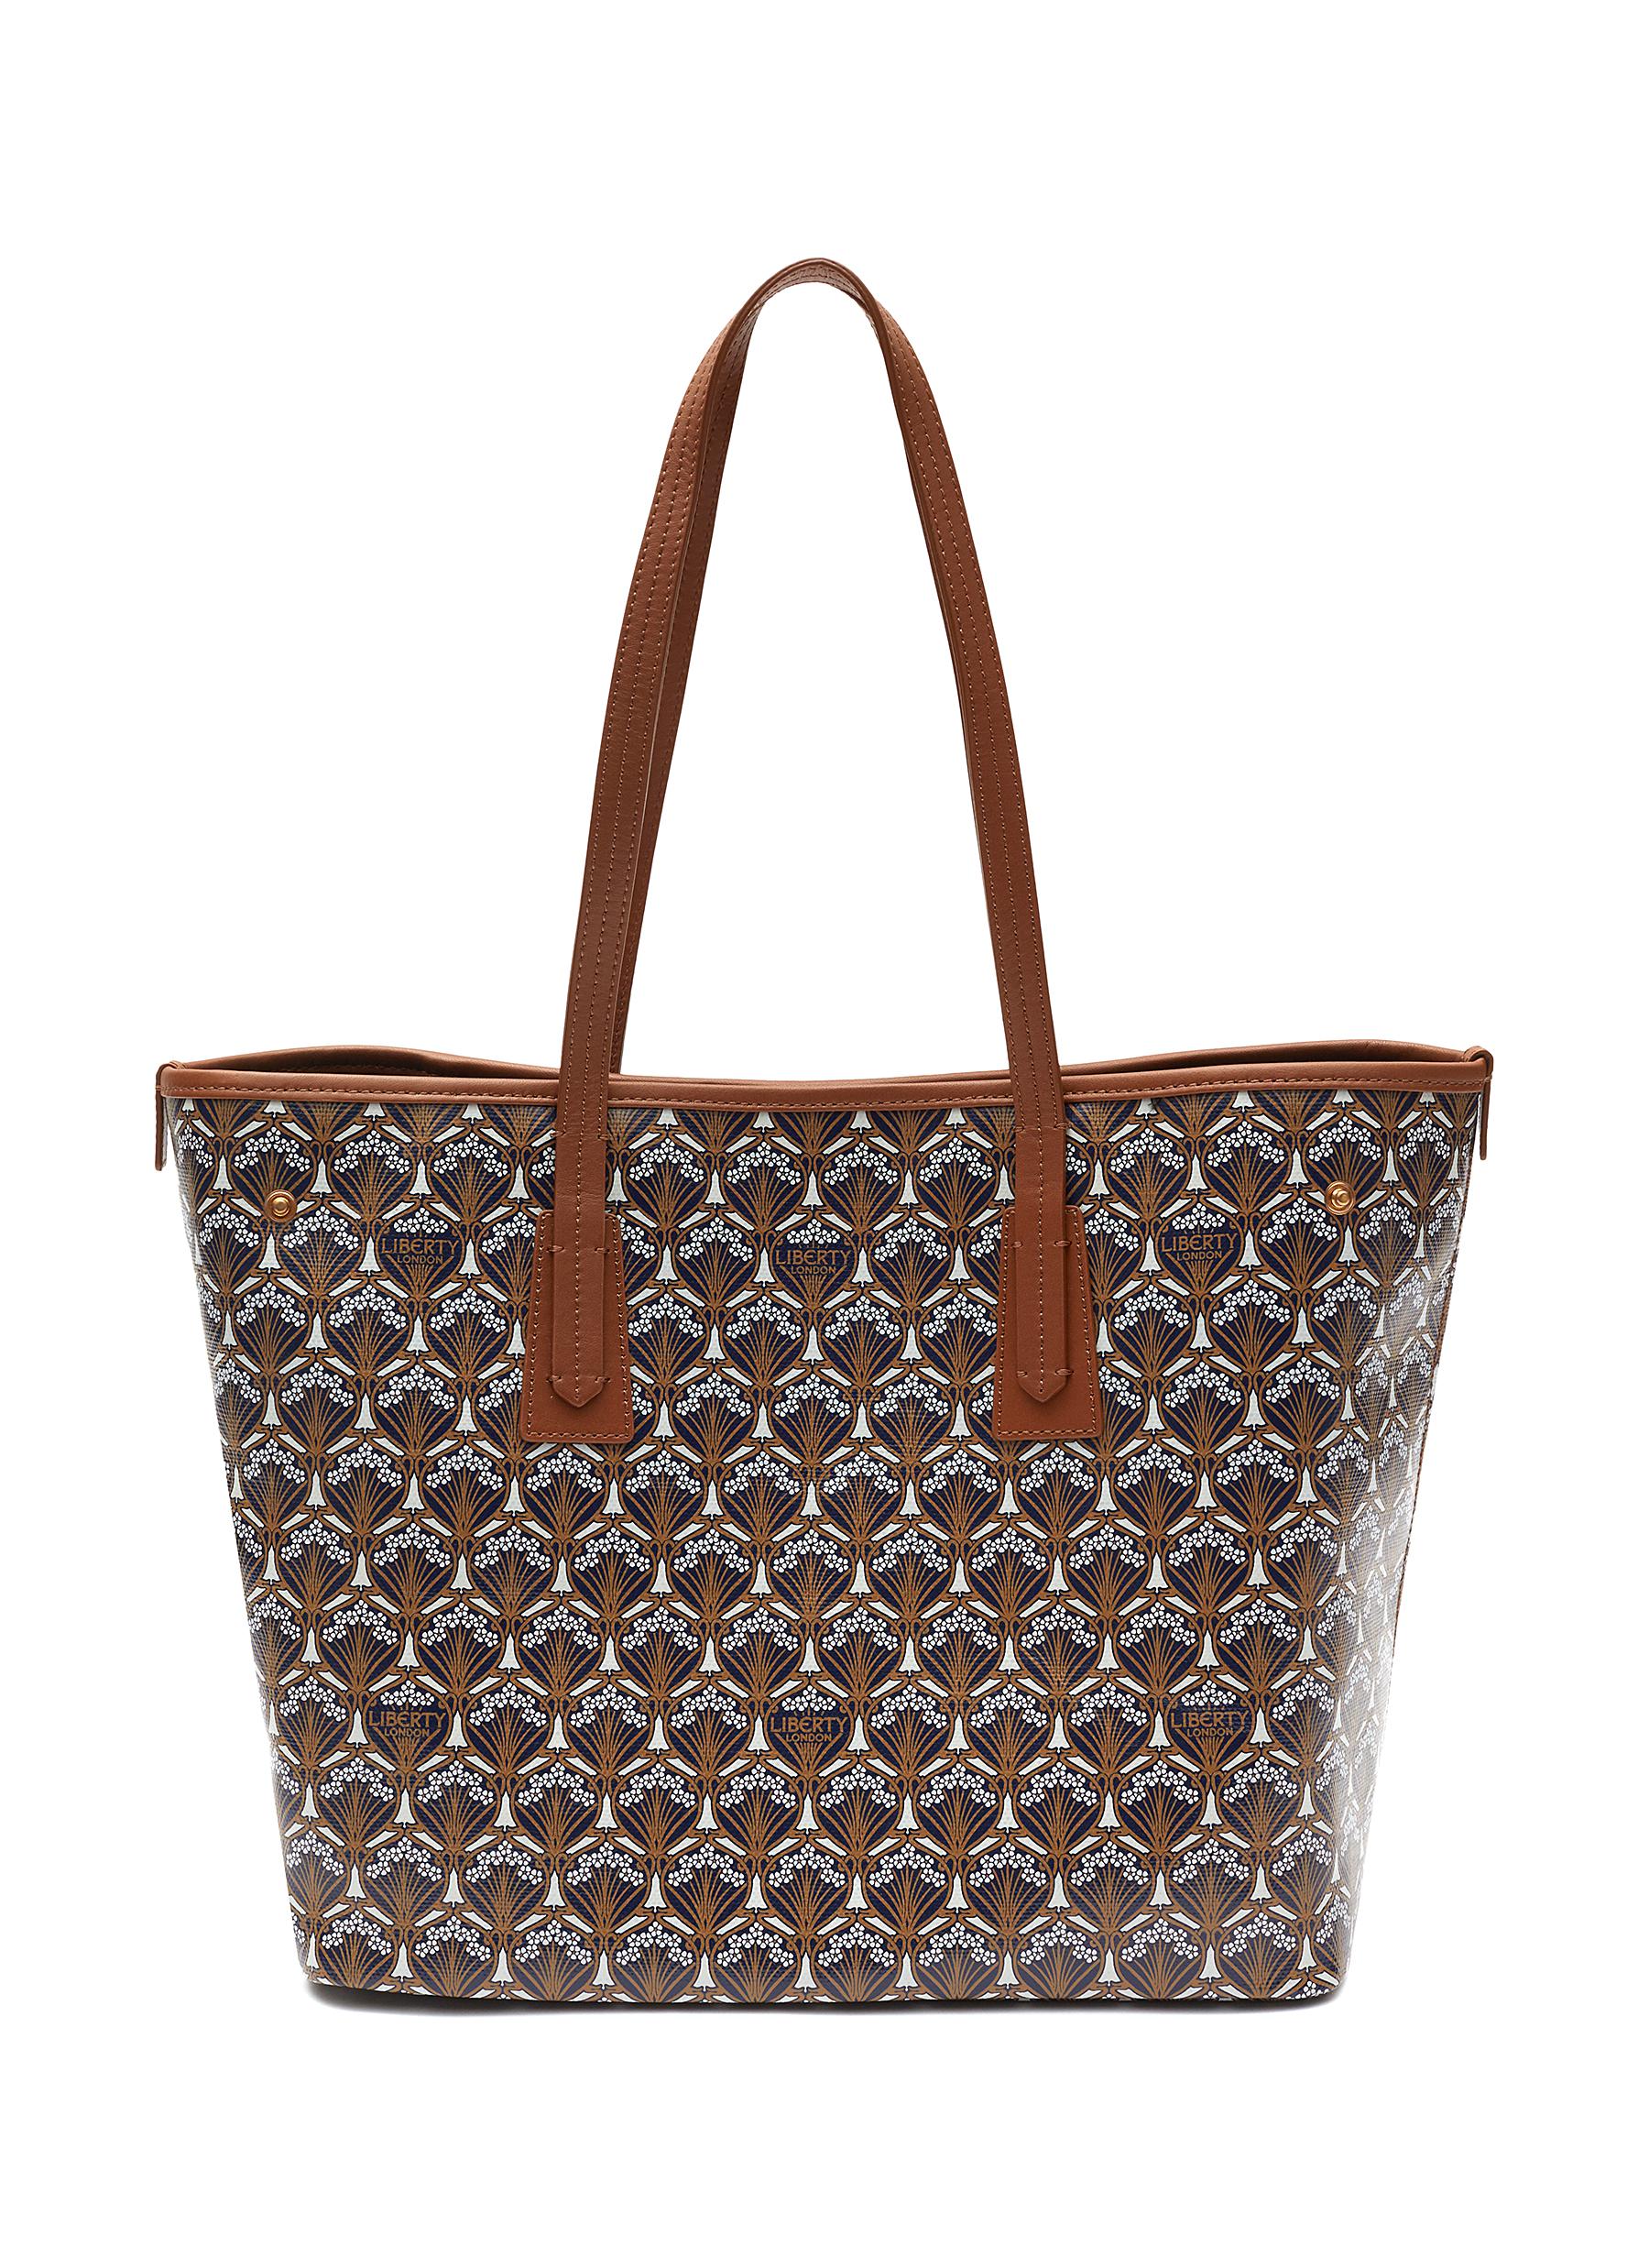 Liberty London 'iphis Little Marlborough' Printed Canvas Tote Bag In Brown